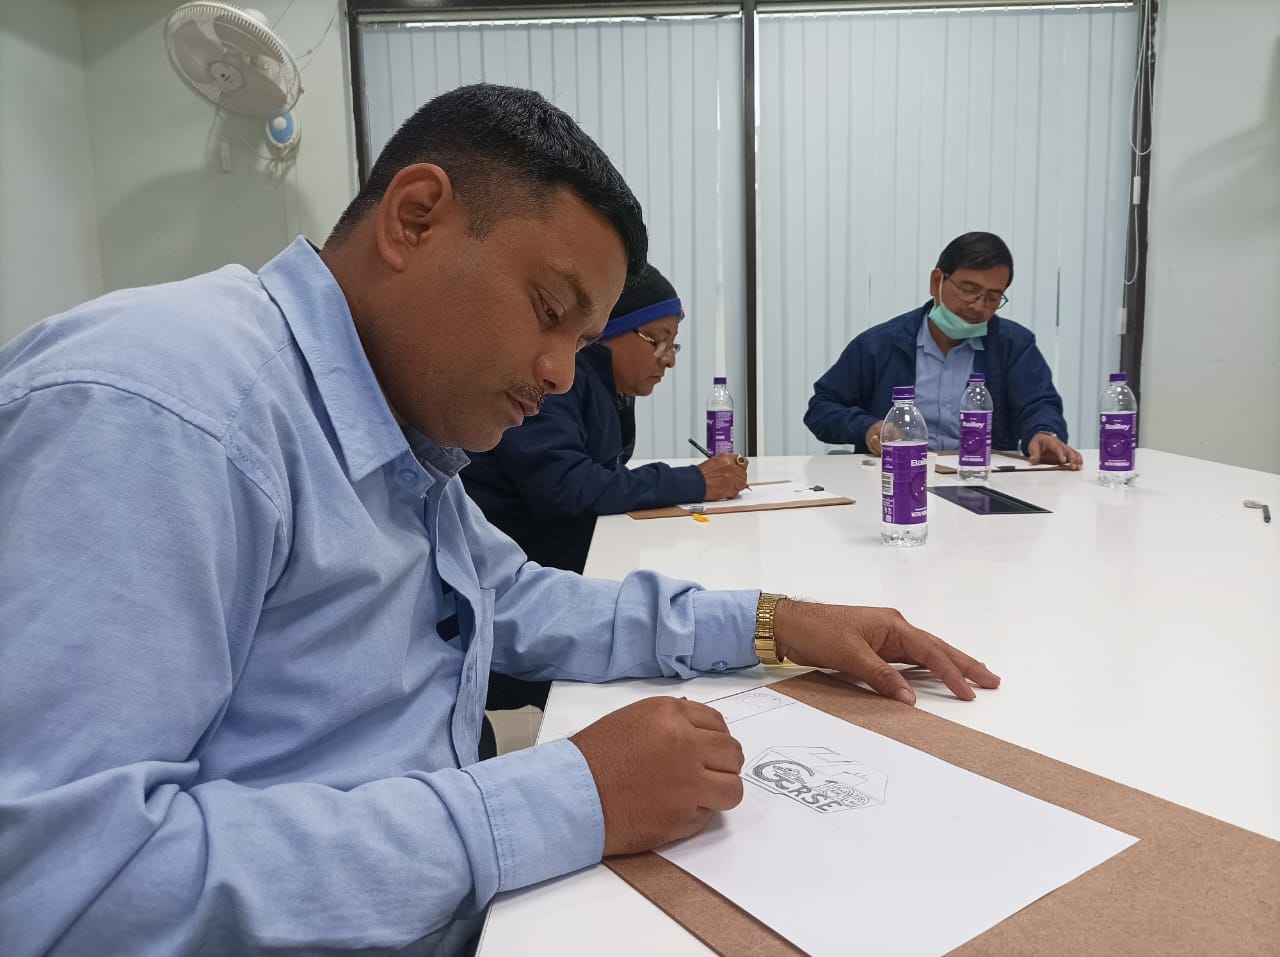 Competitions Organized for Employees as part of AHOBAN 2022-23 on 18 Jan 23